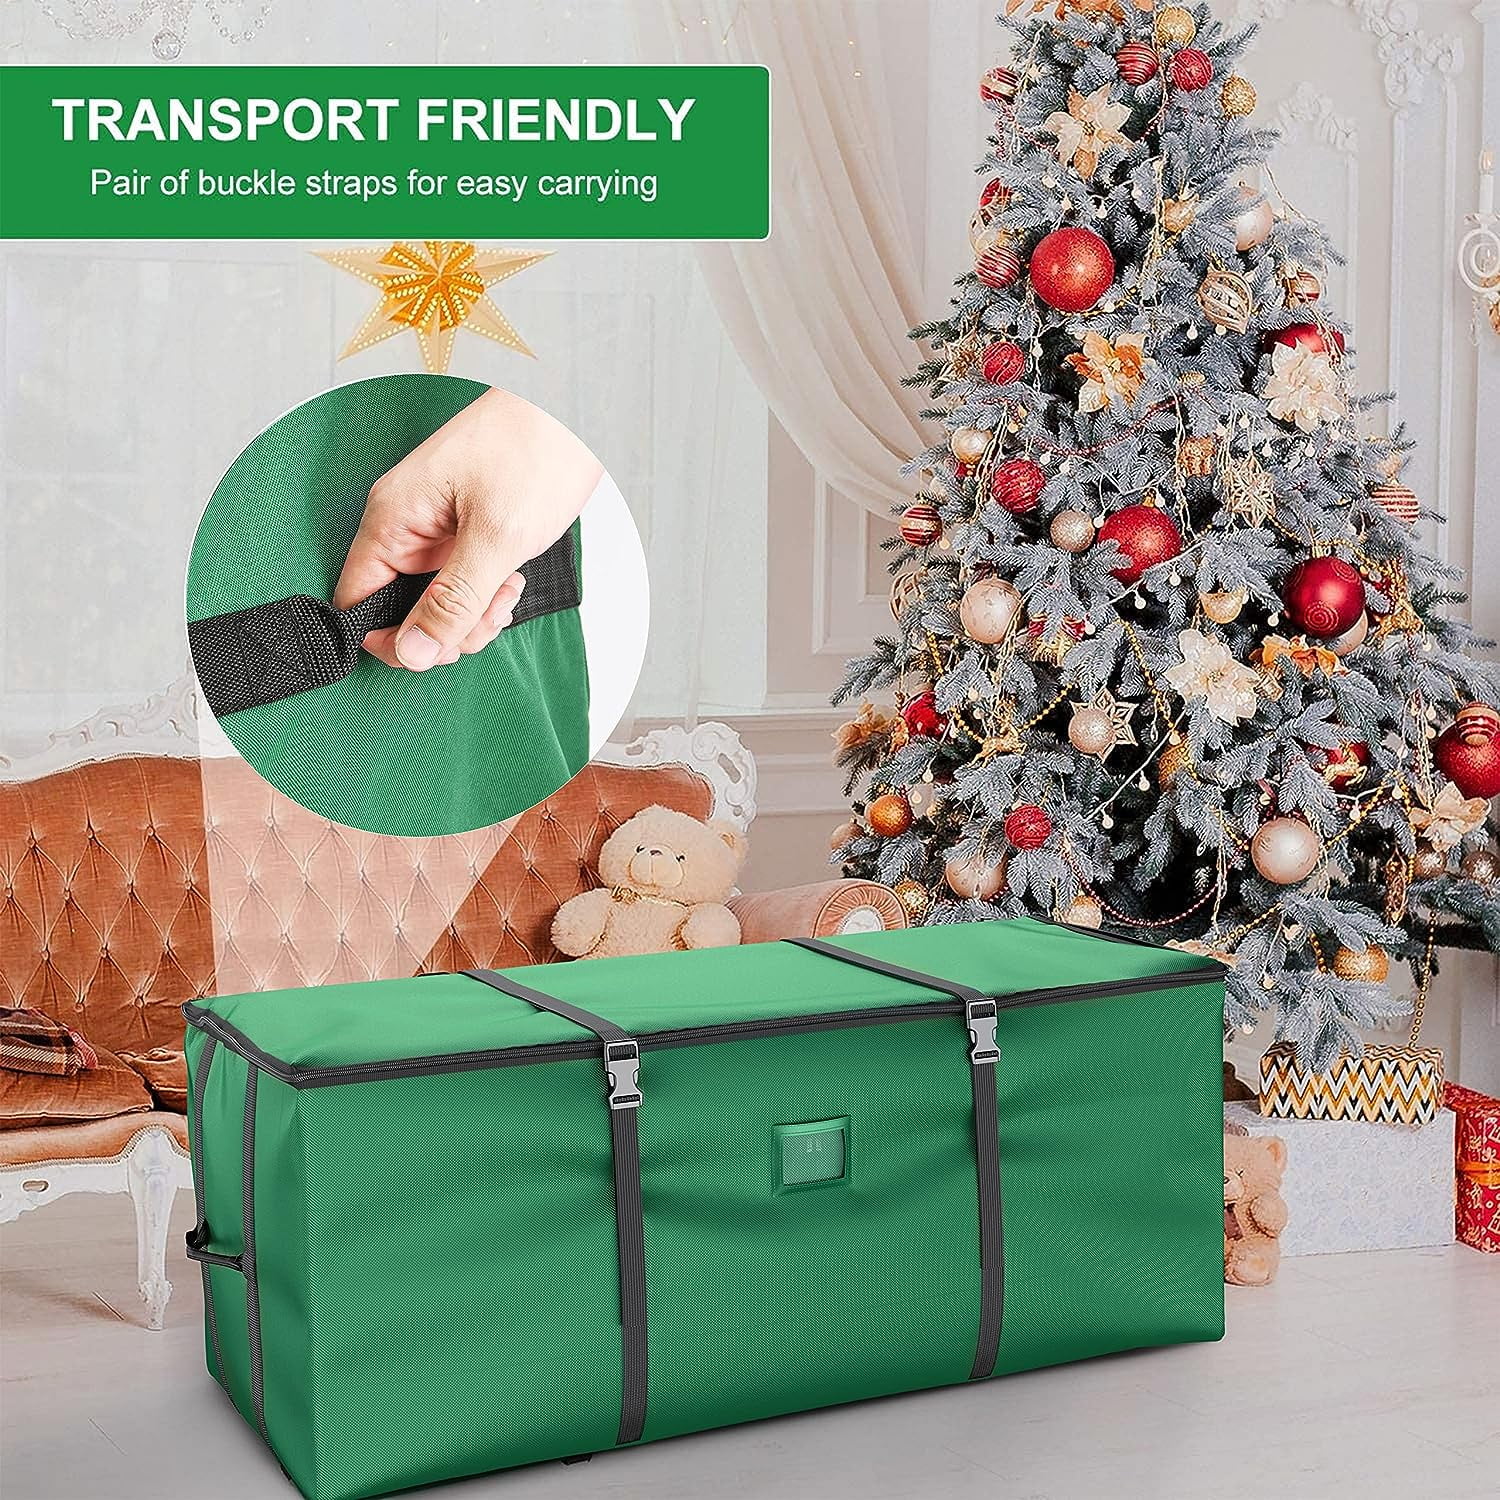 Christmas Gifts on Clearance Dqueduo Christmas Tree Storage Bag Christmas Tree Christmas Items Bag Storage Bags for Christmas Decorations, Adult